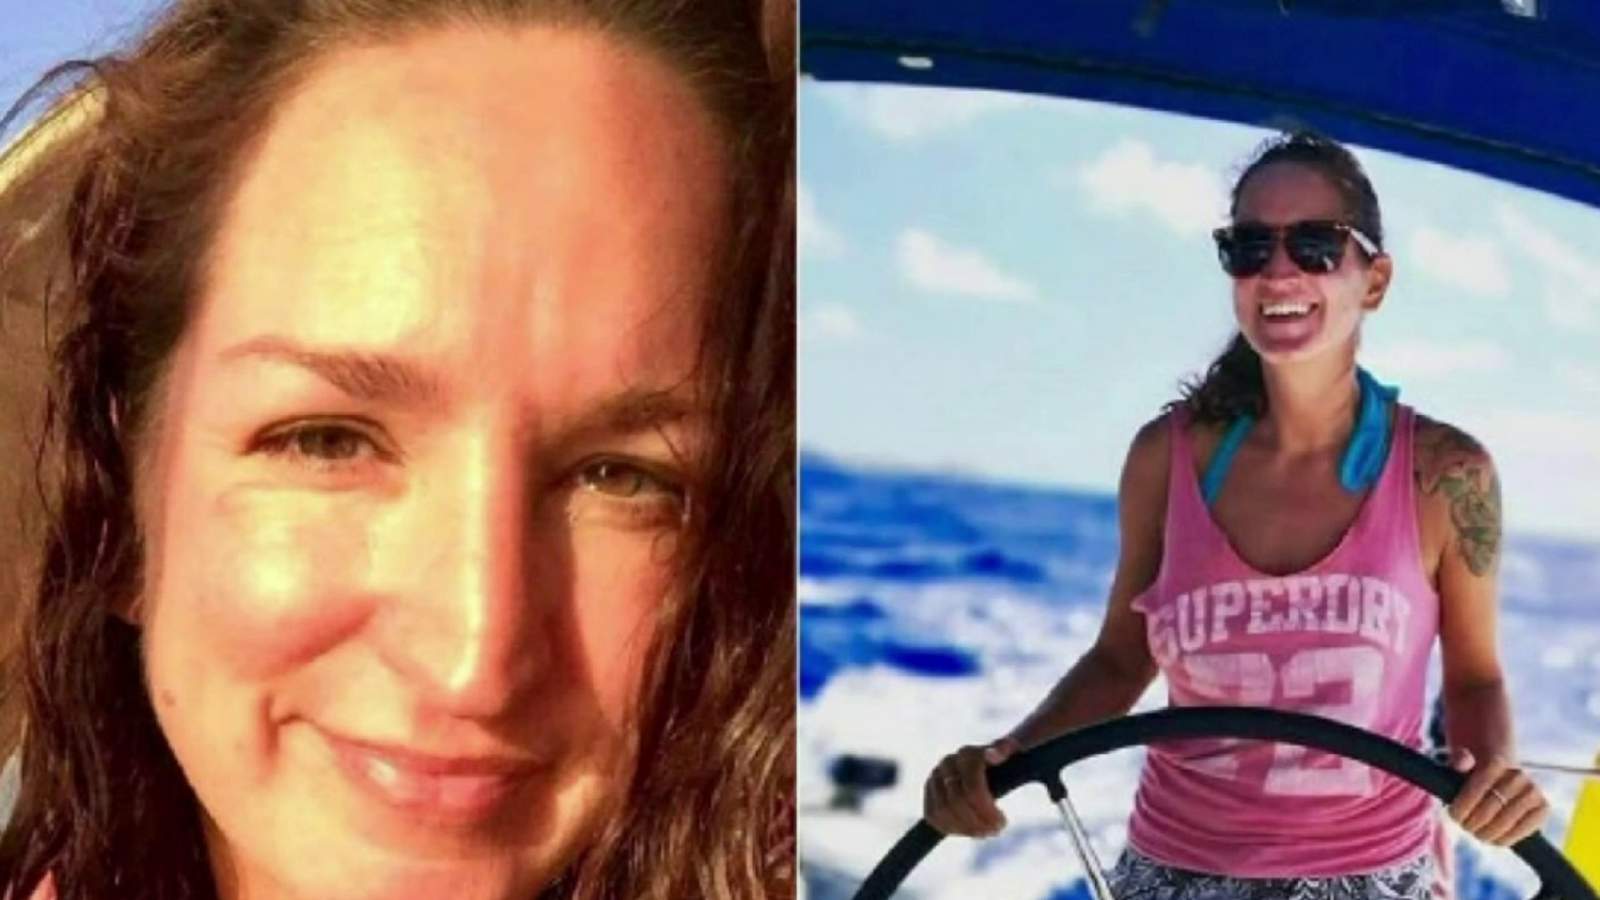 Orion Township native at center of search for missing woman in Virgin Islands